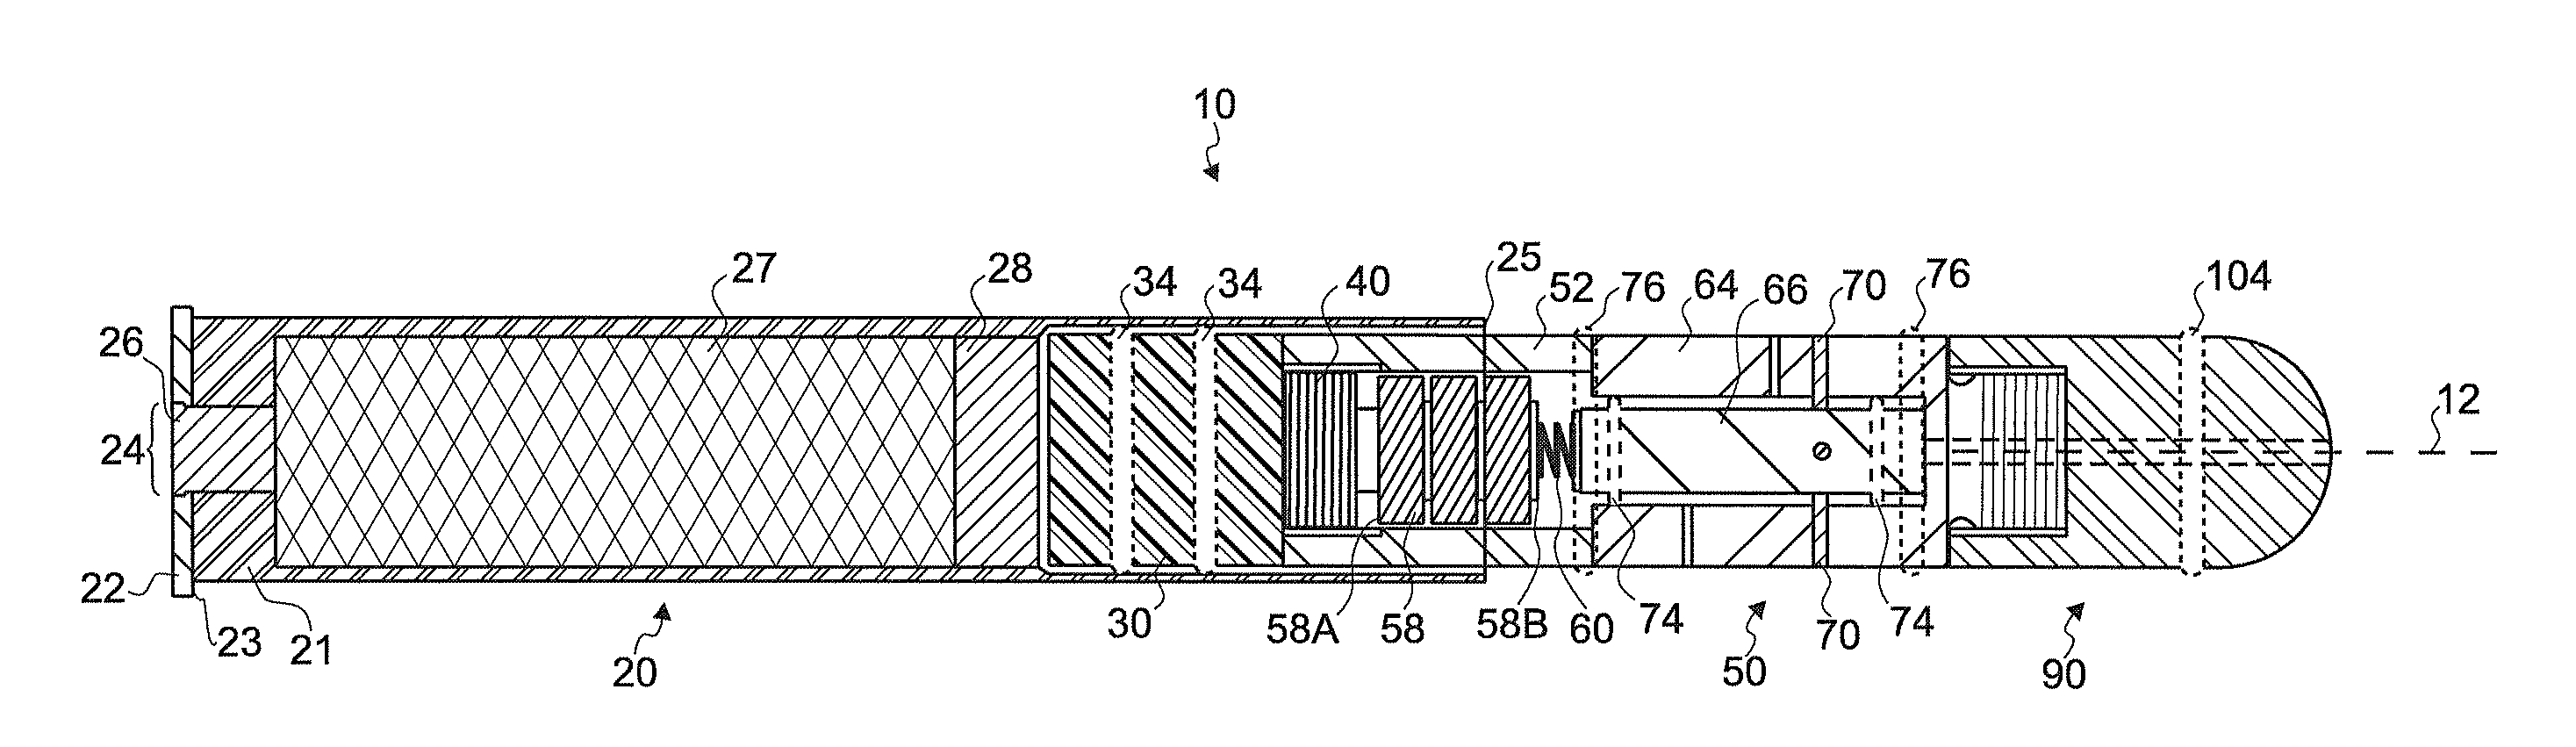 Laser guided projectile device and method therefor